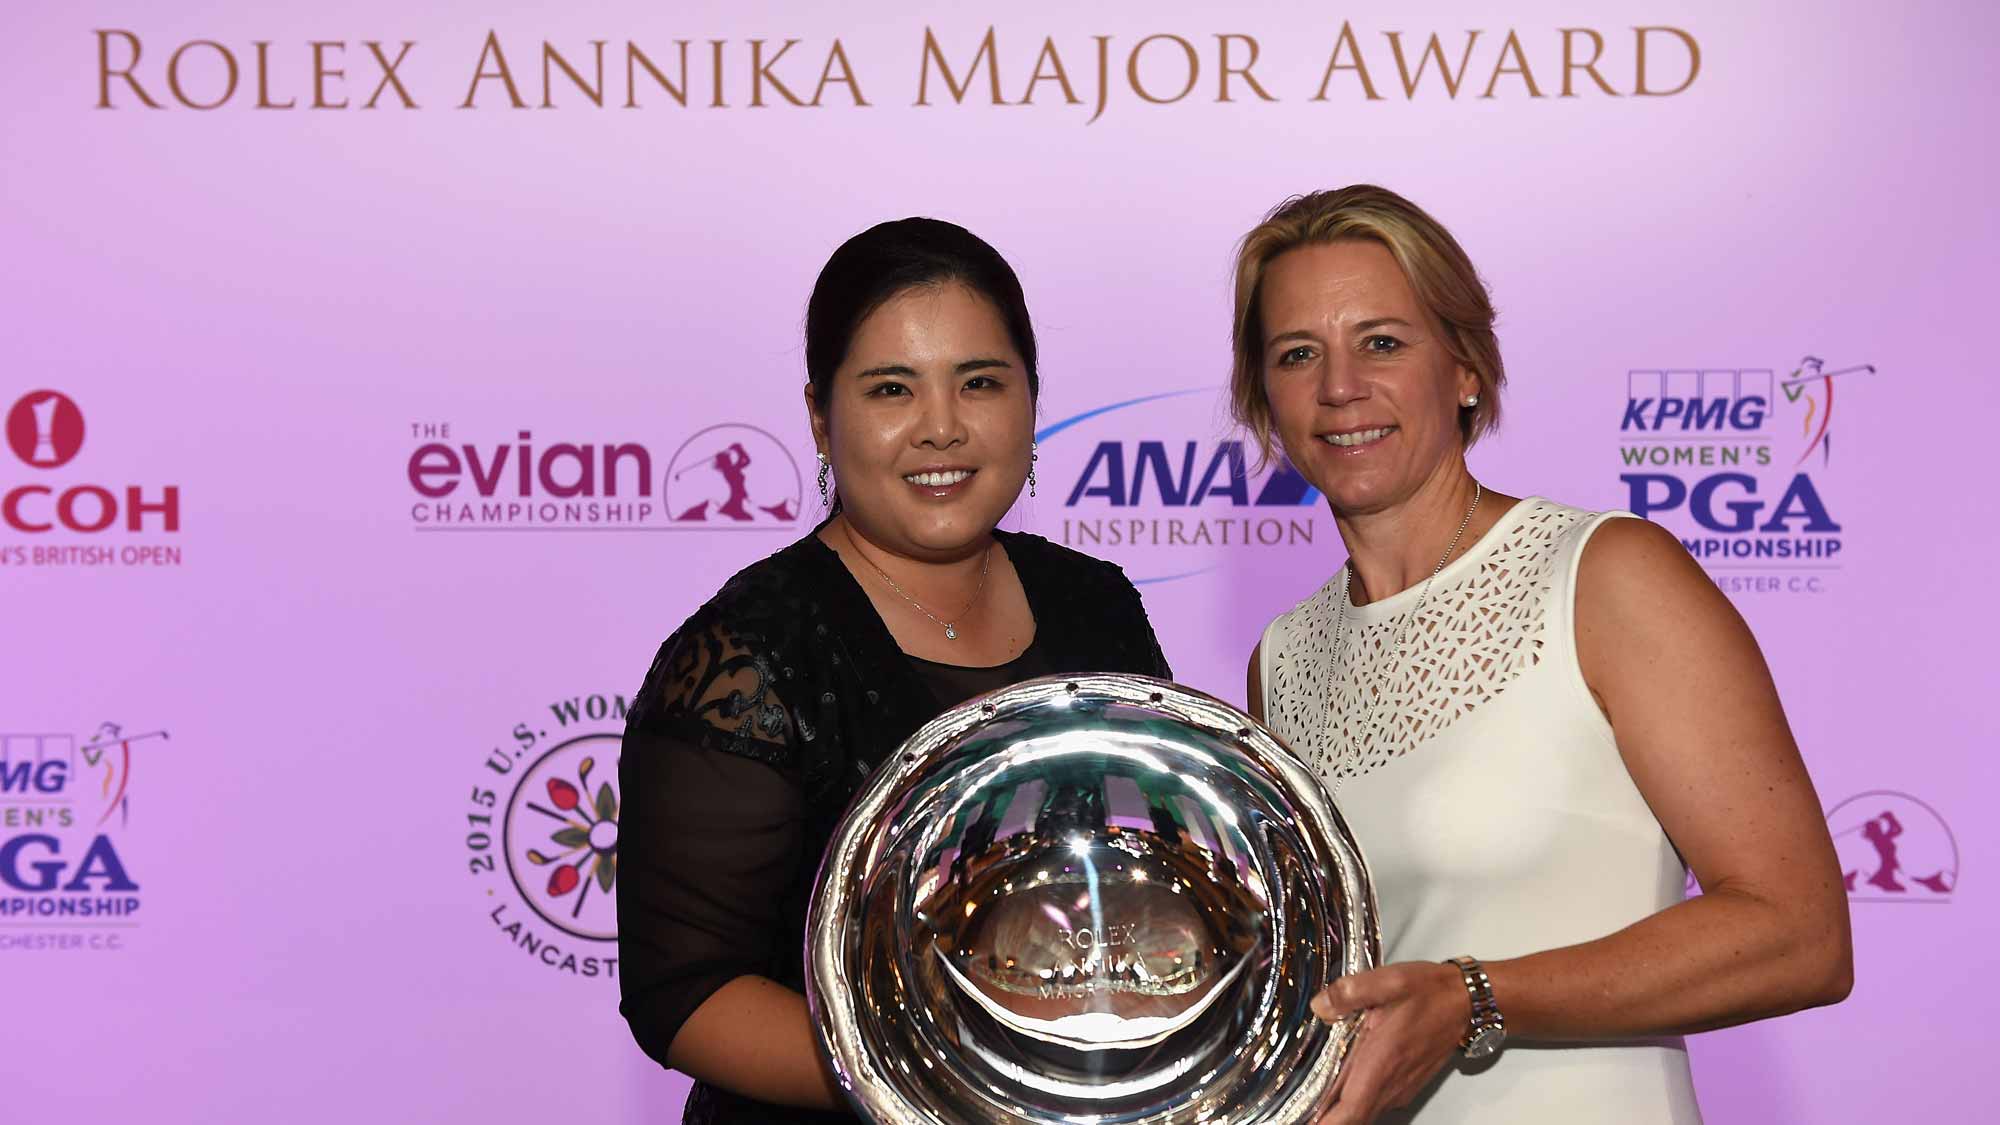 Inbee Park presented with the Rolex Annika Major Award by Annika Sorestam at the Rolex Award ceremony after the third round of the Evian Championship